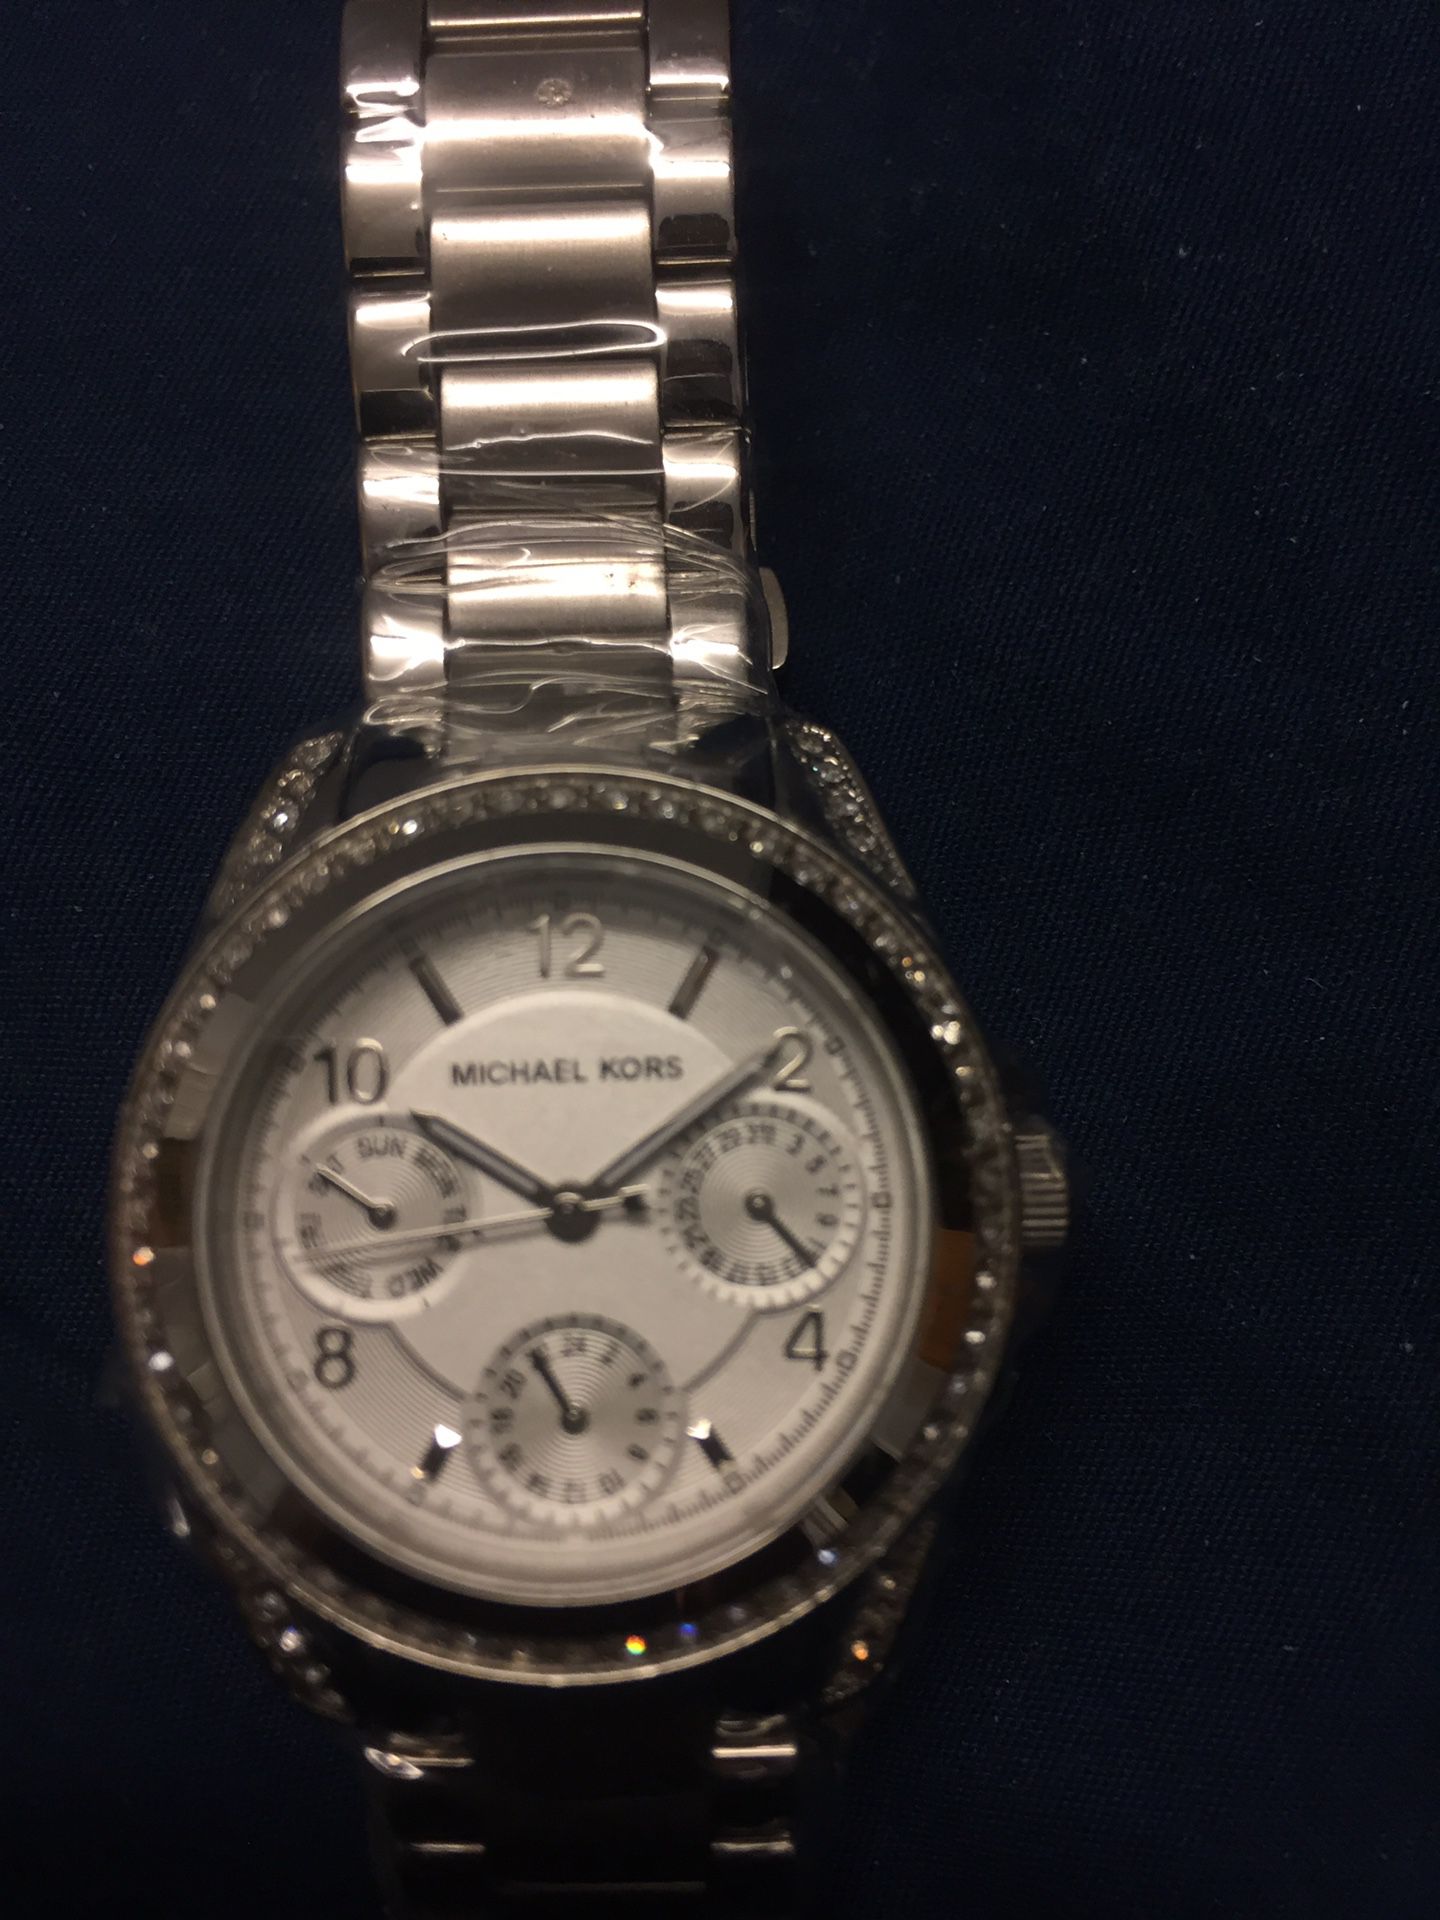 Michael Kors Blair Women's Brand New Watch. MK5612, Sliver tone, Date Calendar. local pickup only , cash only no PayPal